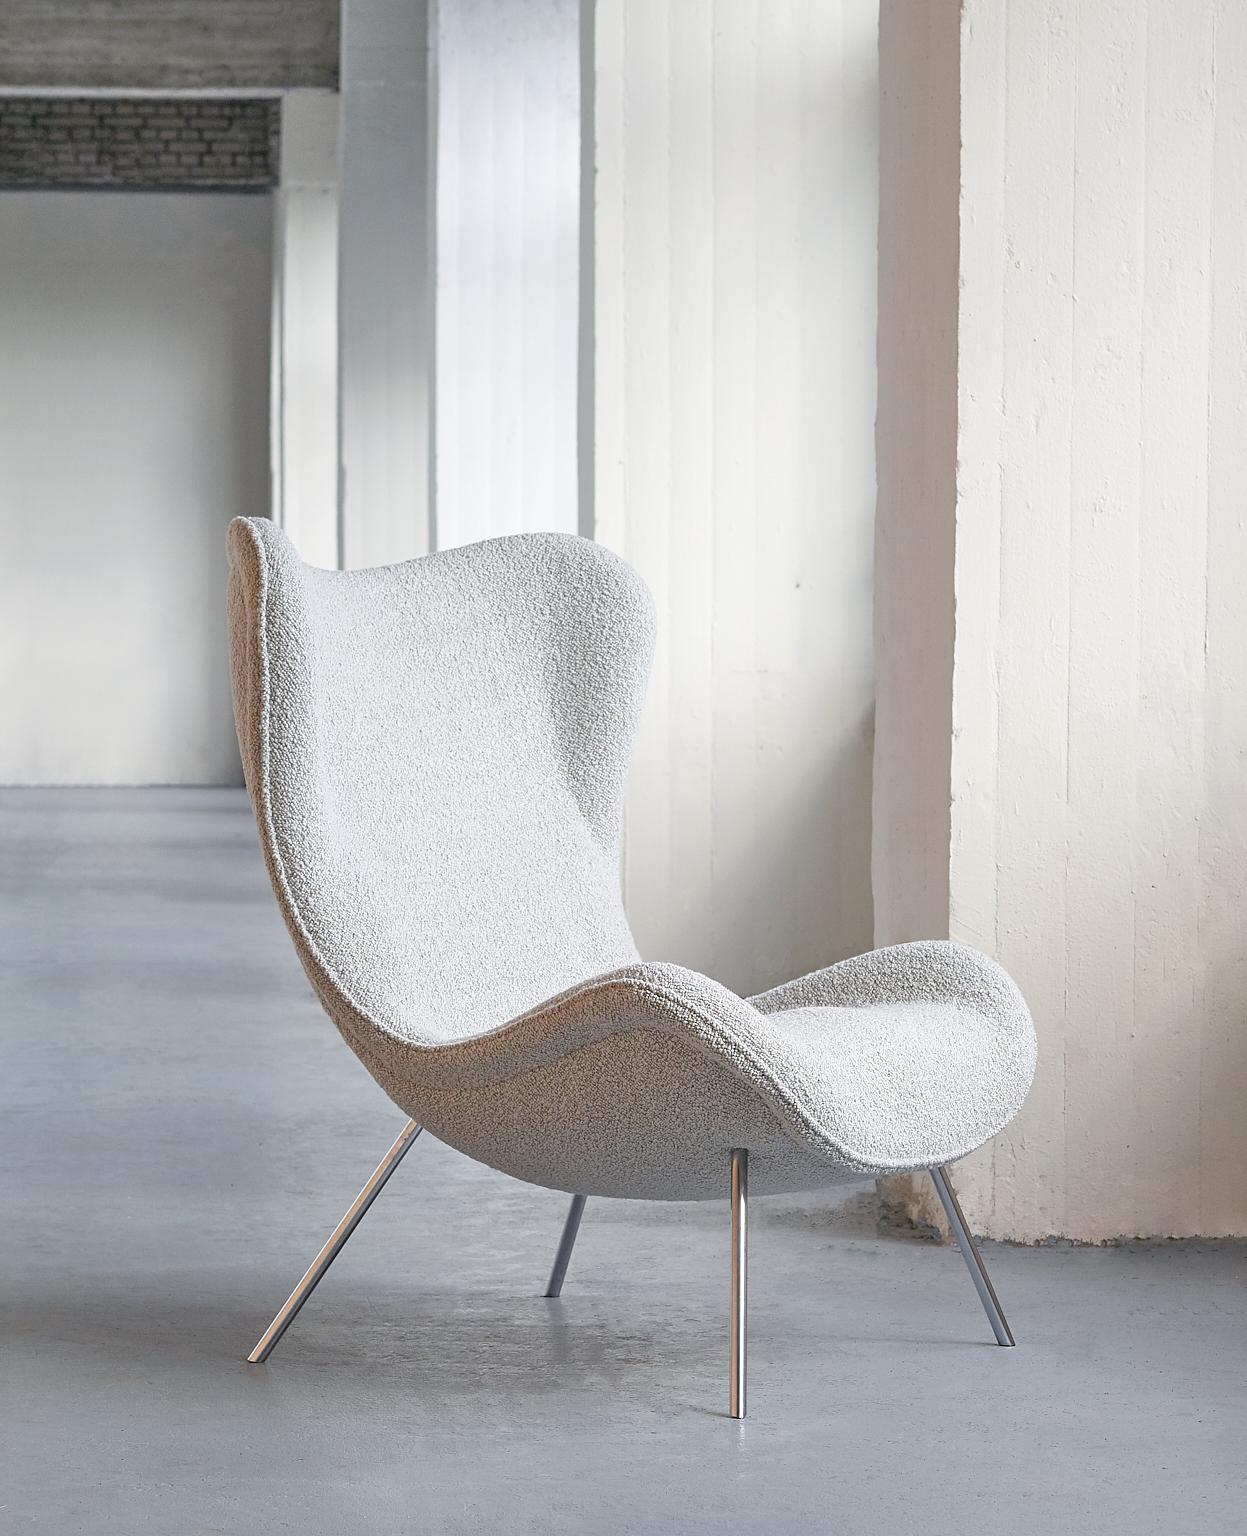 This rare 'Madame' lounge chair was designed by Fritz Neth and produced by the Correcta Sitzformbau Company in Kassel, Germany in the early 1950s. The organically shaped seat gives the chair a sculptural and striking appearance. The chair is very